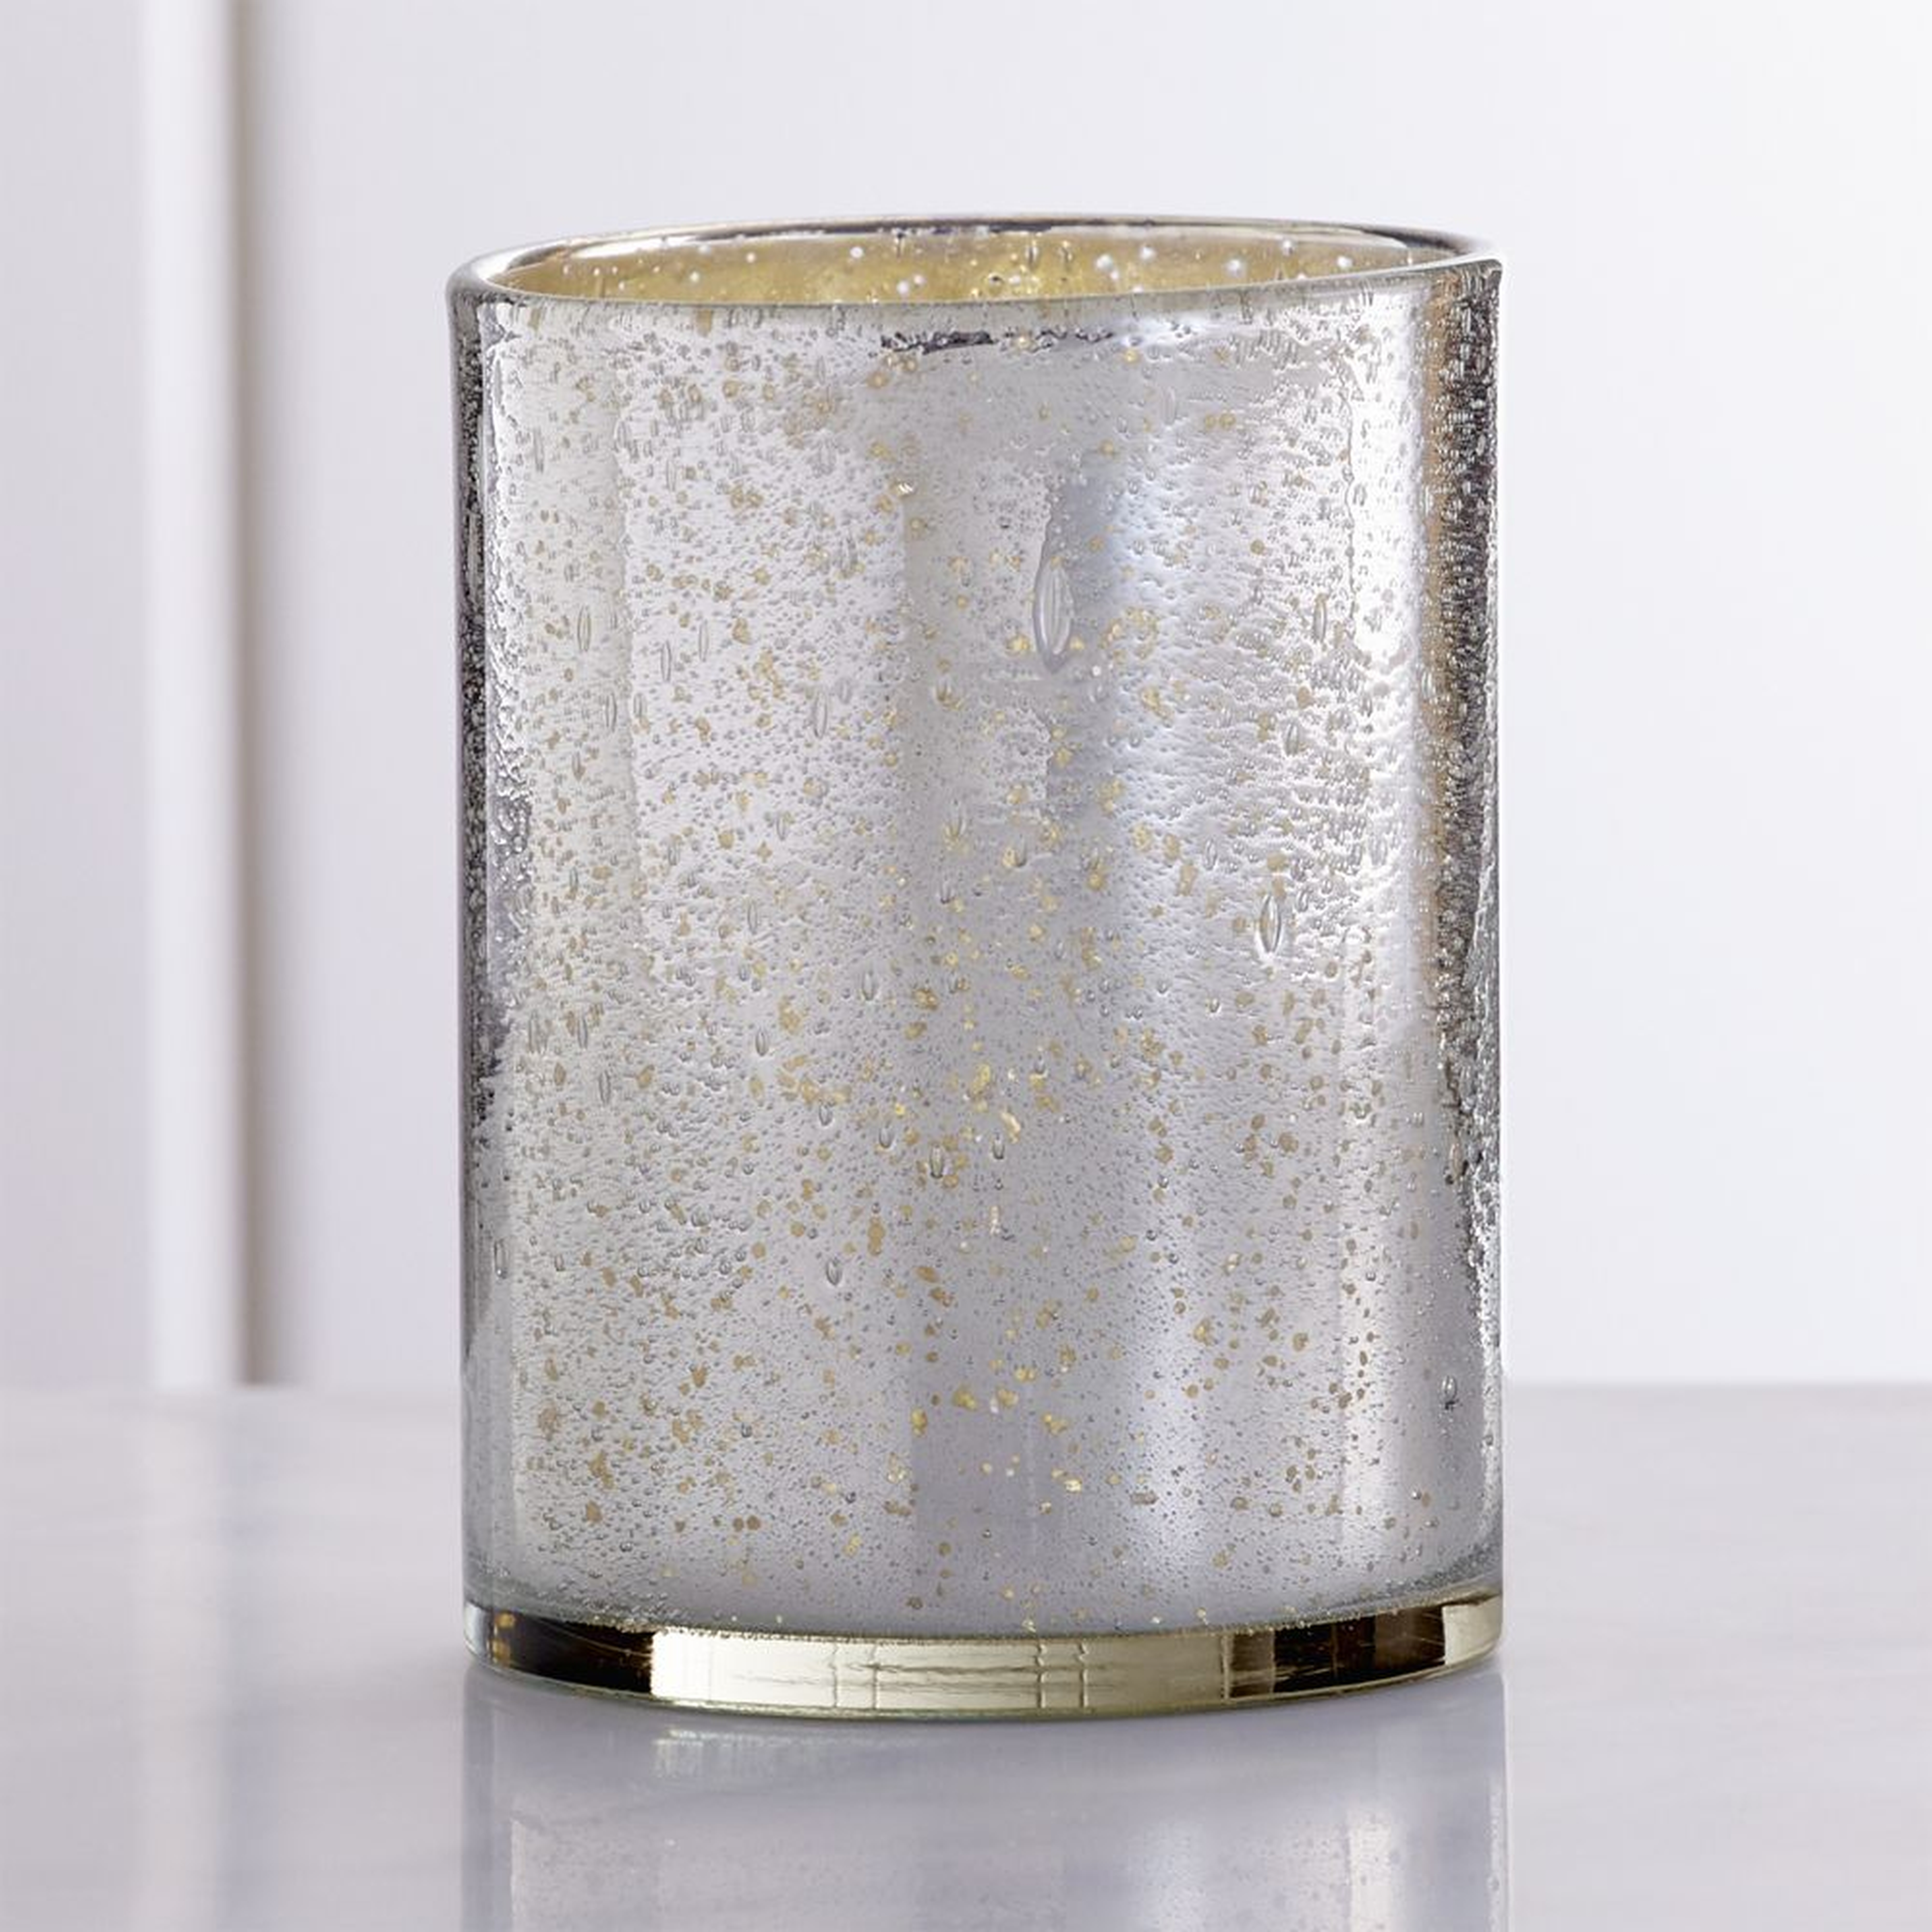 Bubbled Silver Hurricane Candle Holder - LARGE - Crate and Barrel